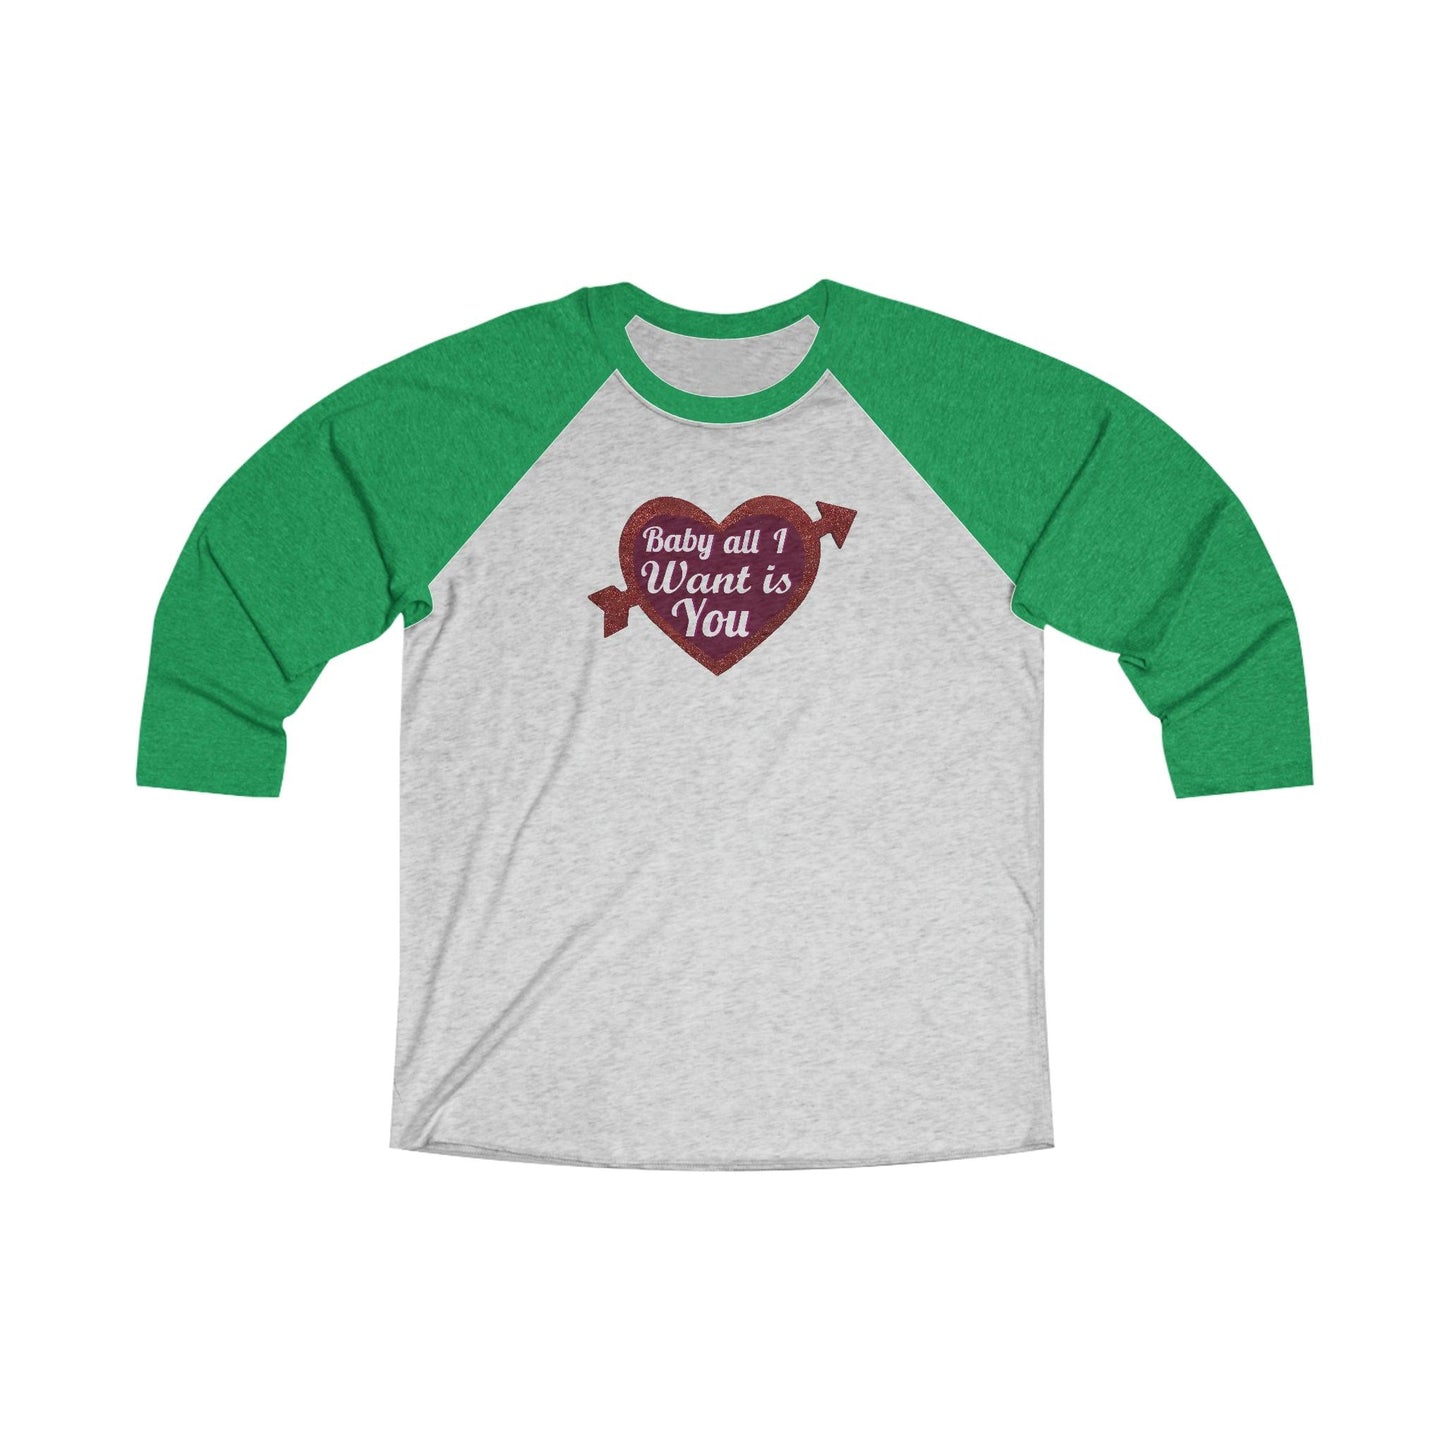 Baby All I Want is You Tri-Blend 34 Raglan Tee - Giftsmojo